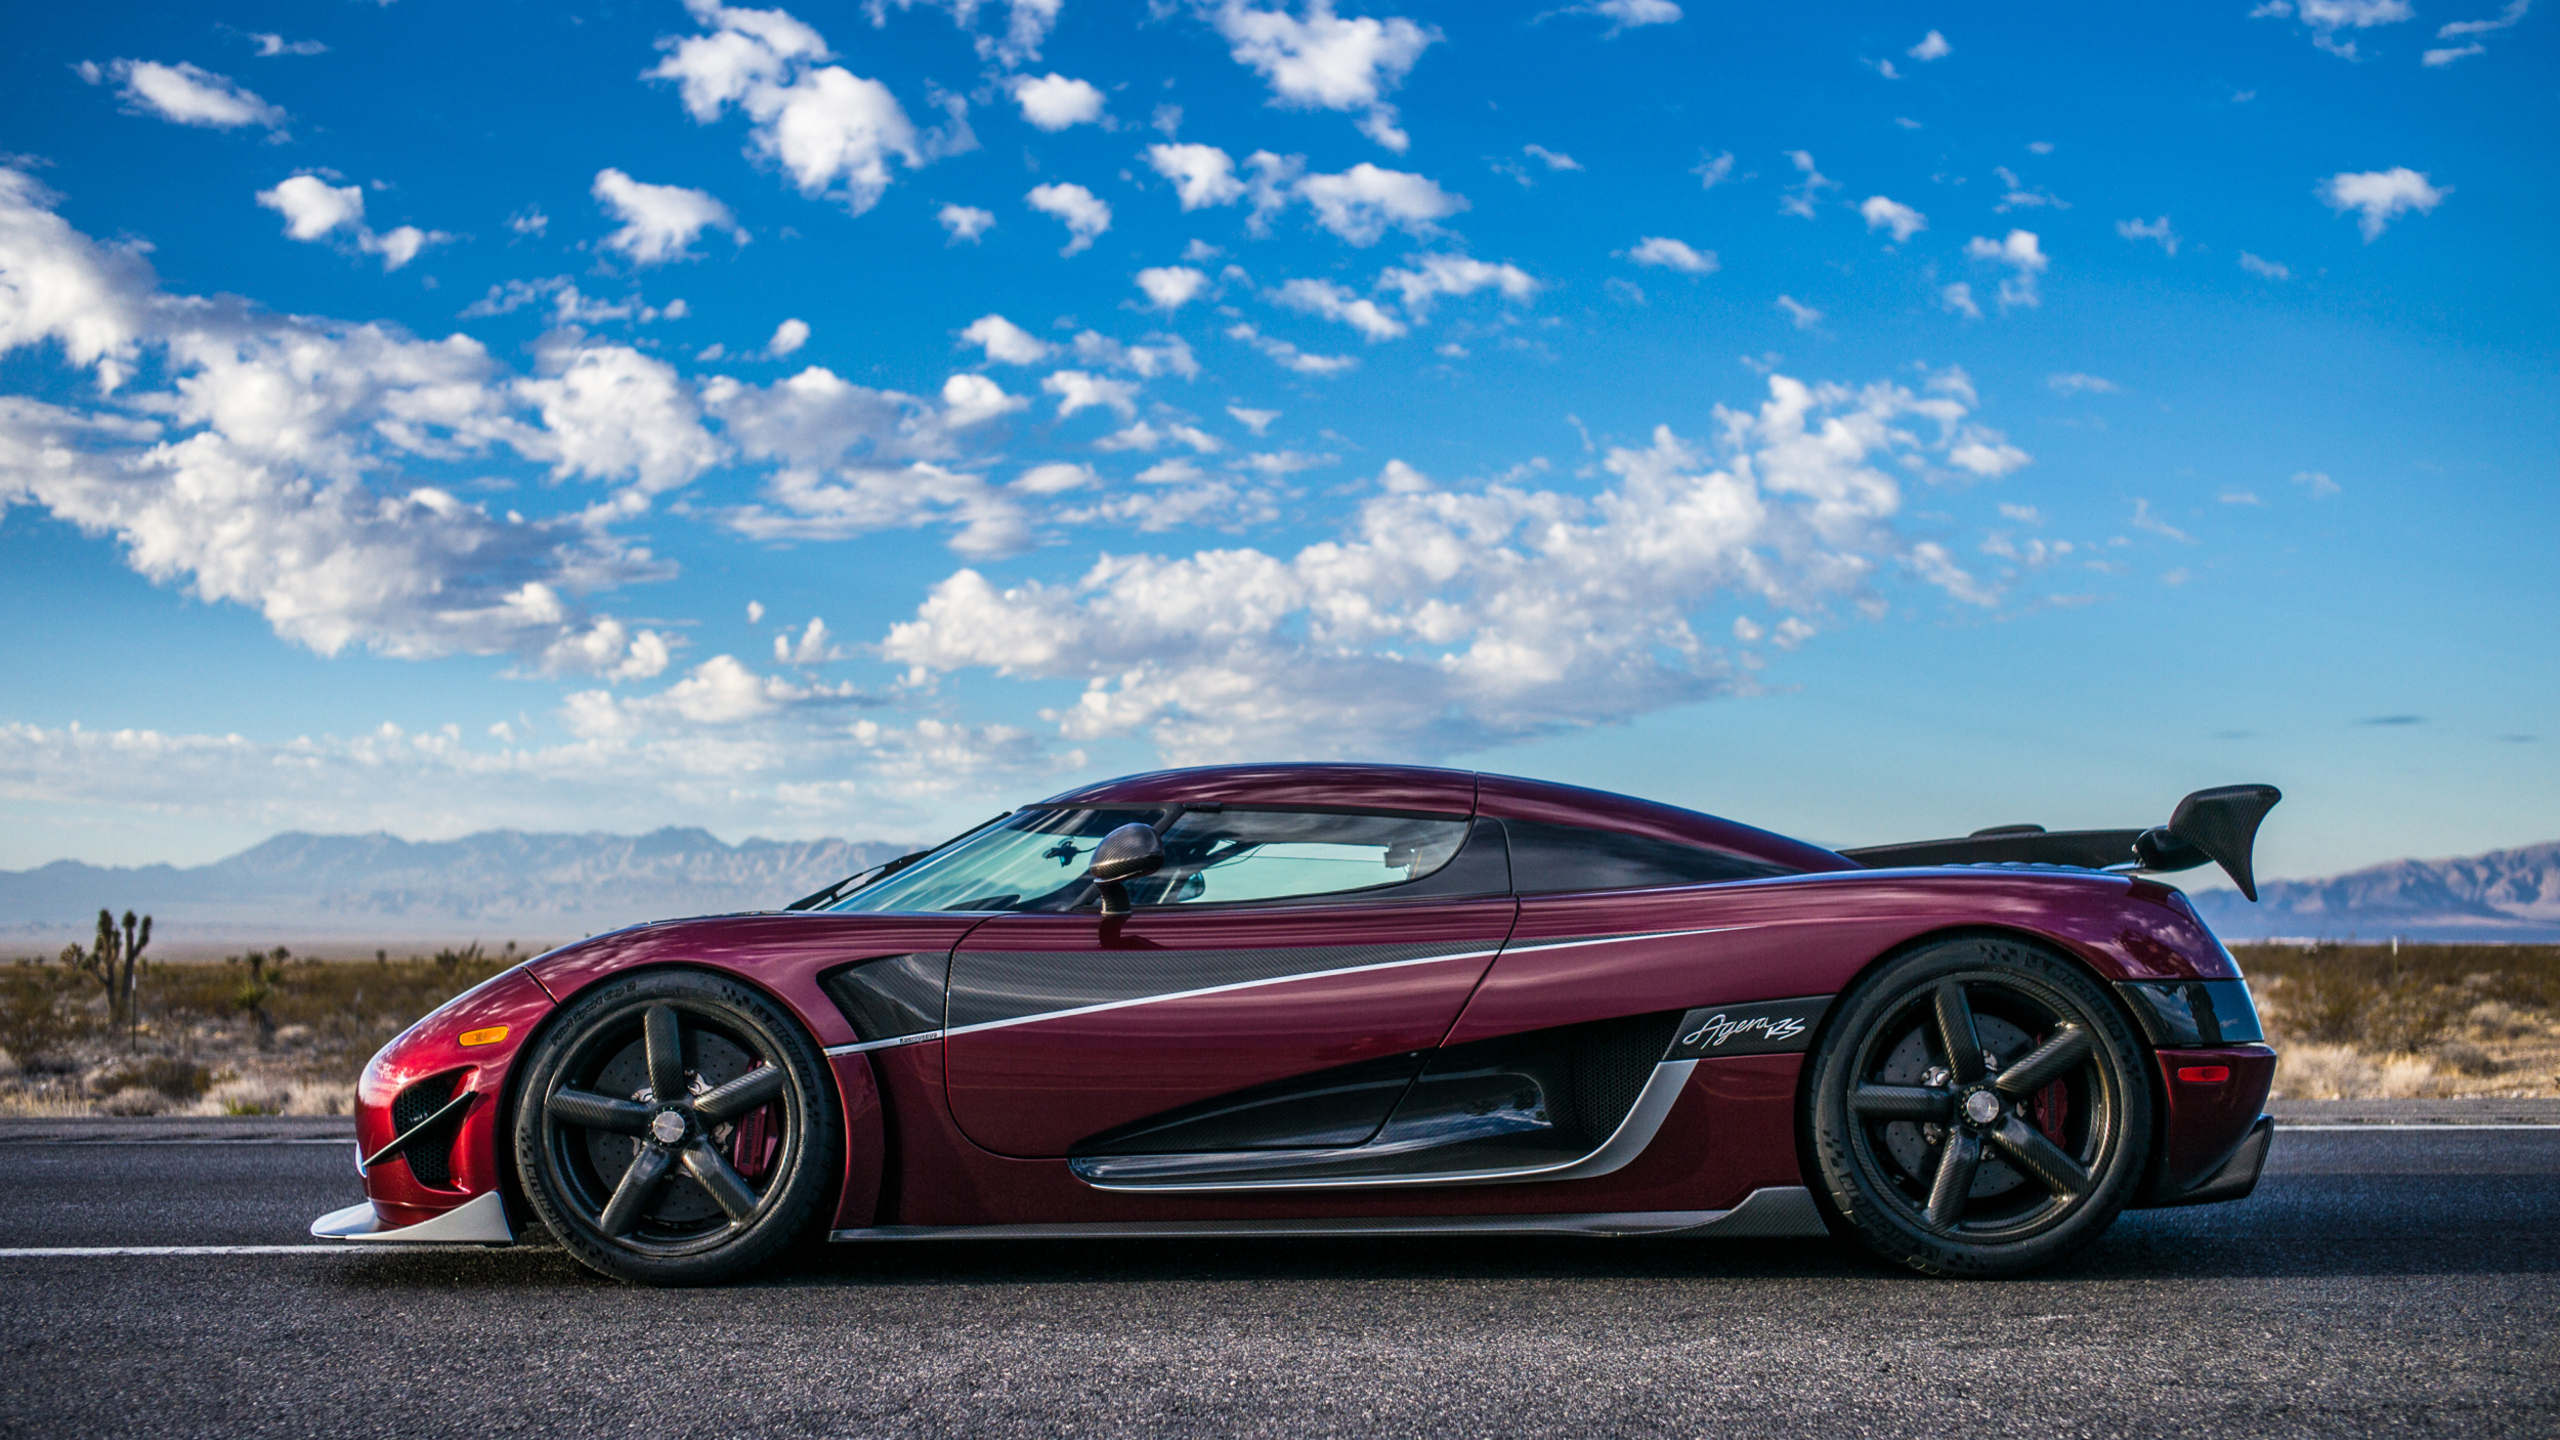 2560x1440 Koenigsegg Agera Rs 1440p Resolution Hd 4k Wallpapers Images Backgrounds Photos And Pictures